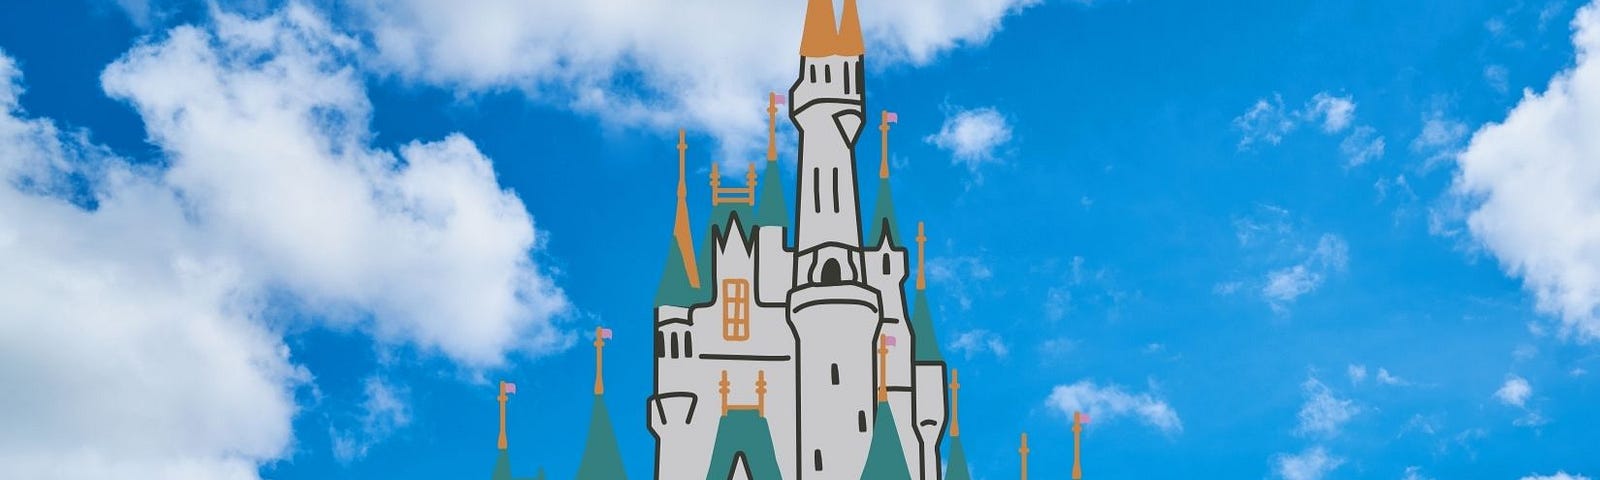 A Disney castle floating in the clouds